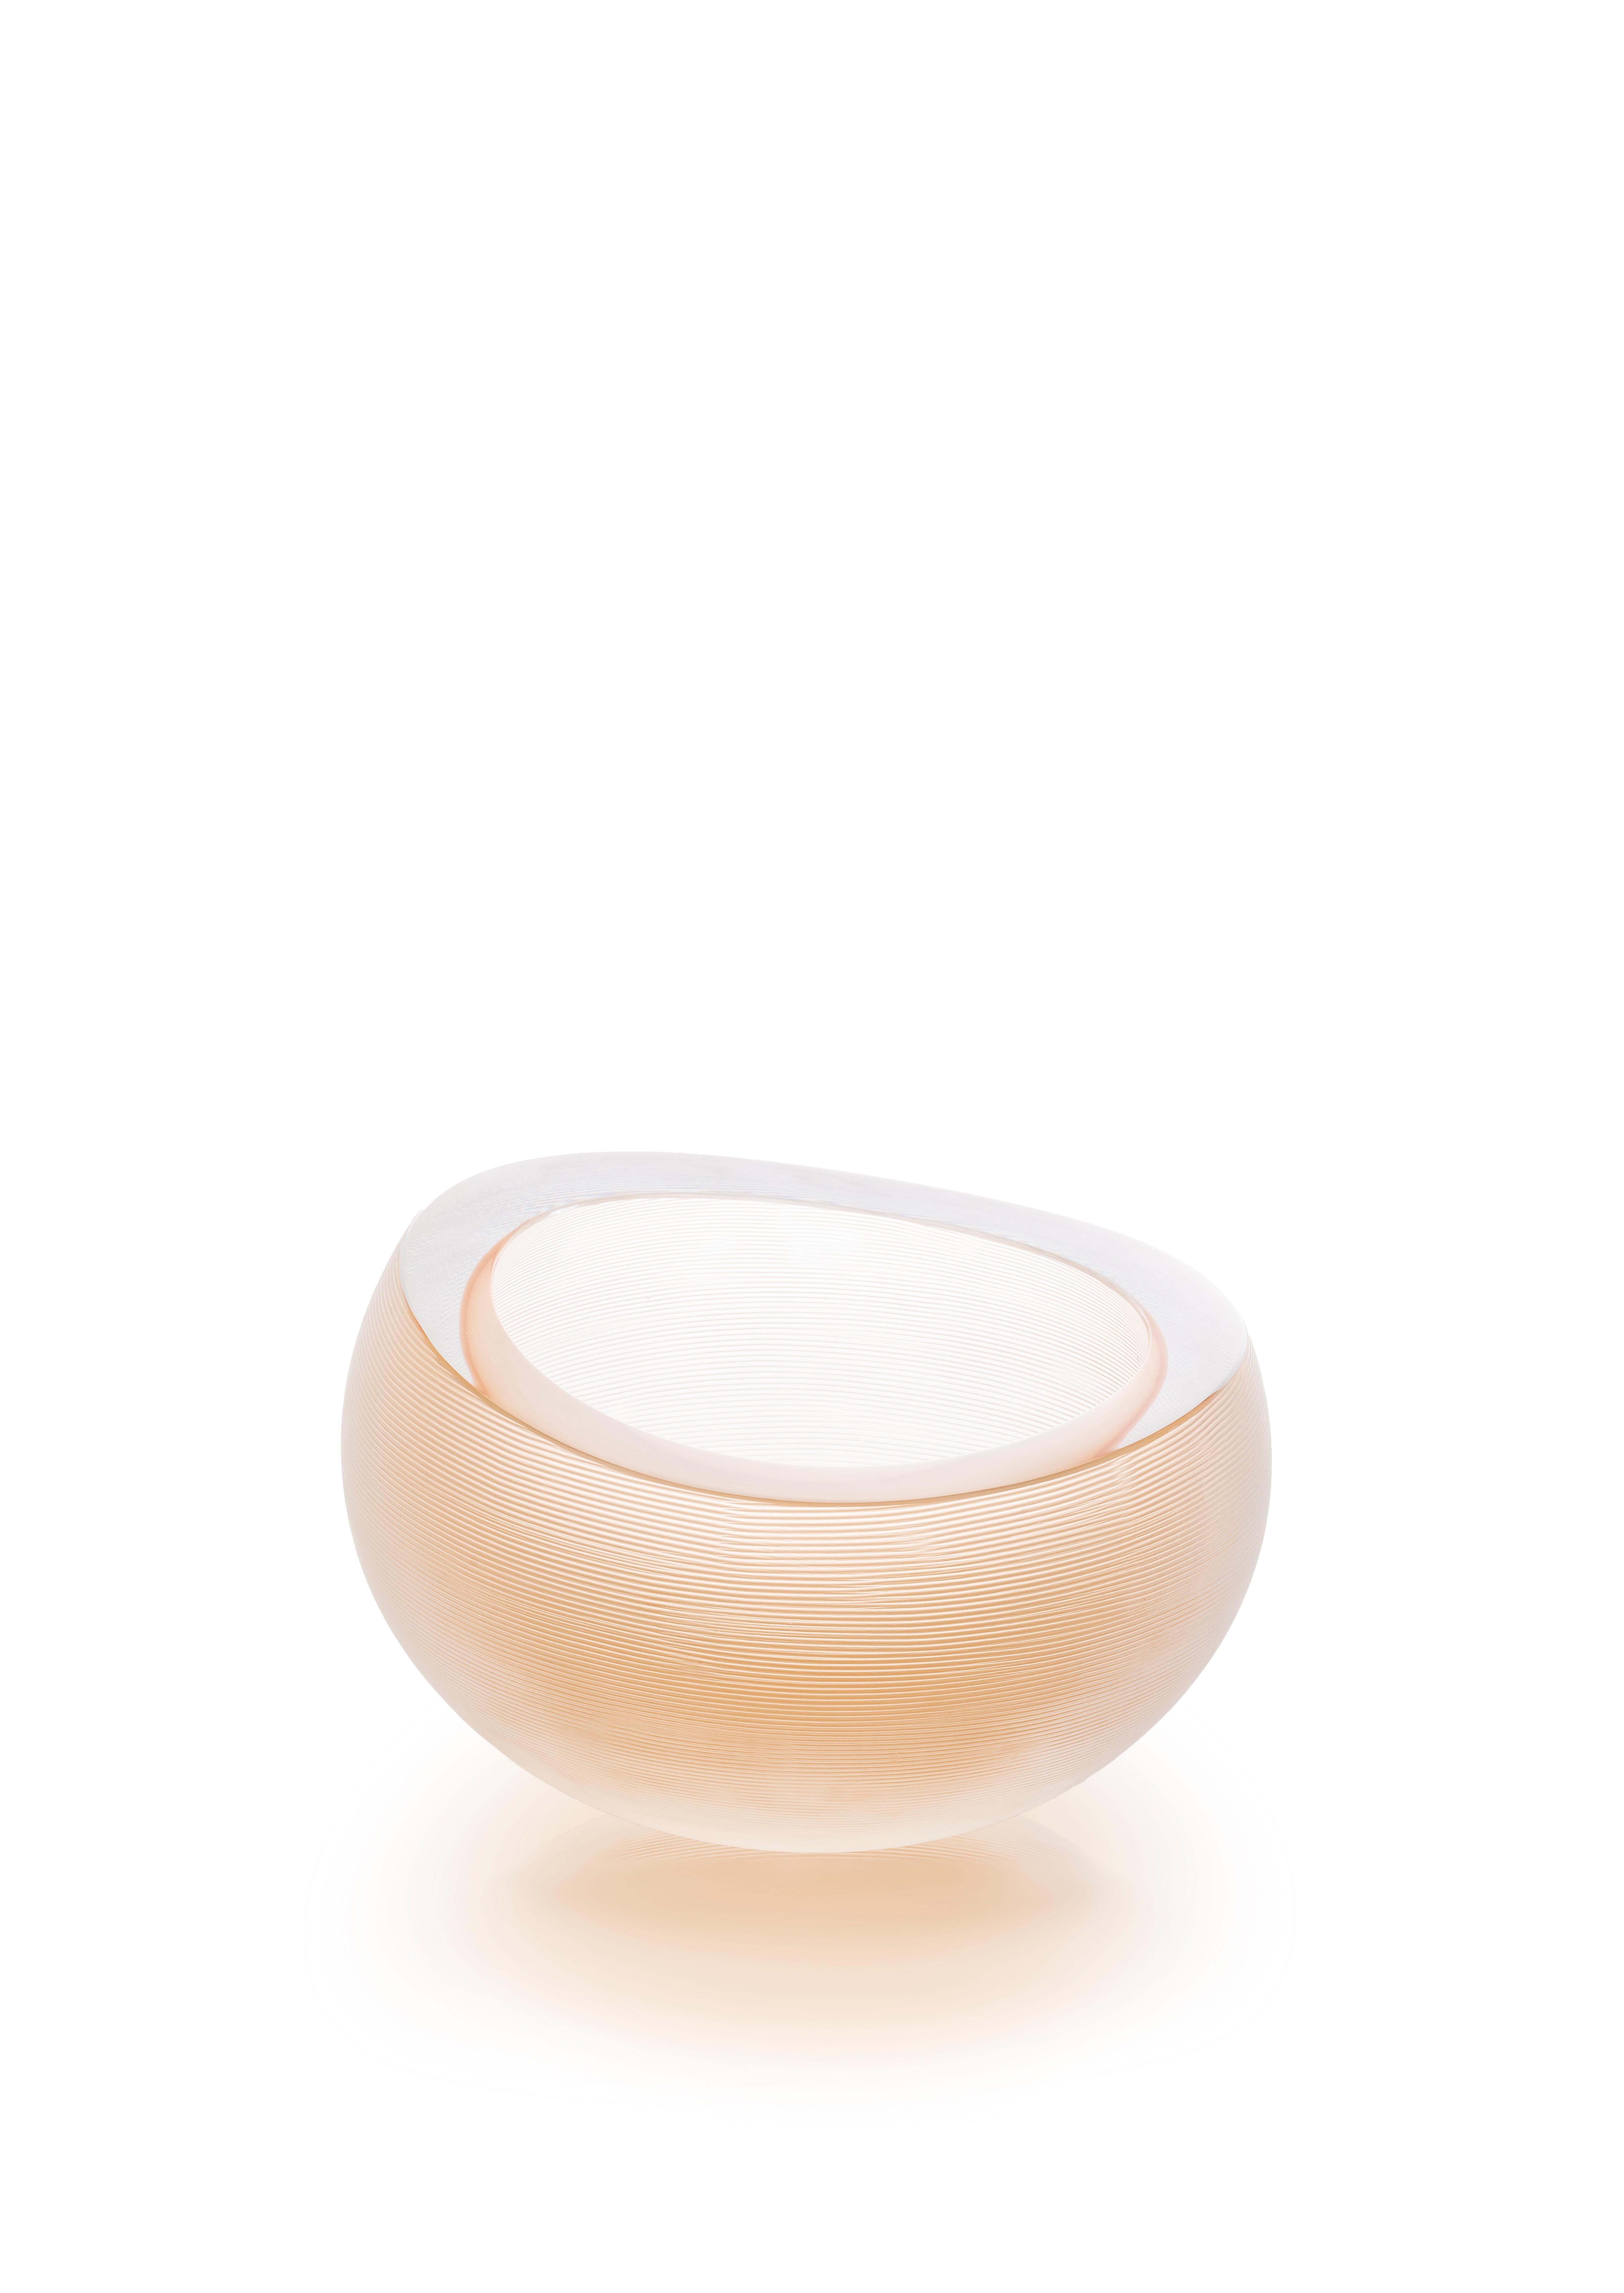 Linae small vase, Murano glass, designed by Federico Peri, 21st century.
The Linae vases — circular pots with a blunt rim are made in solid colour and thick blown Murano glass — are available in three different shapes and different finishes /